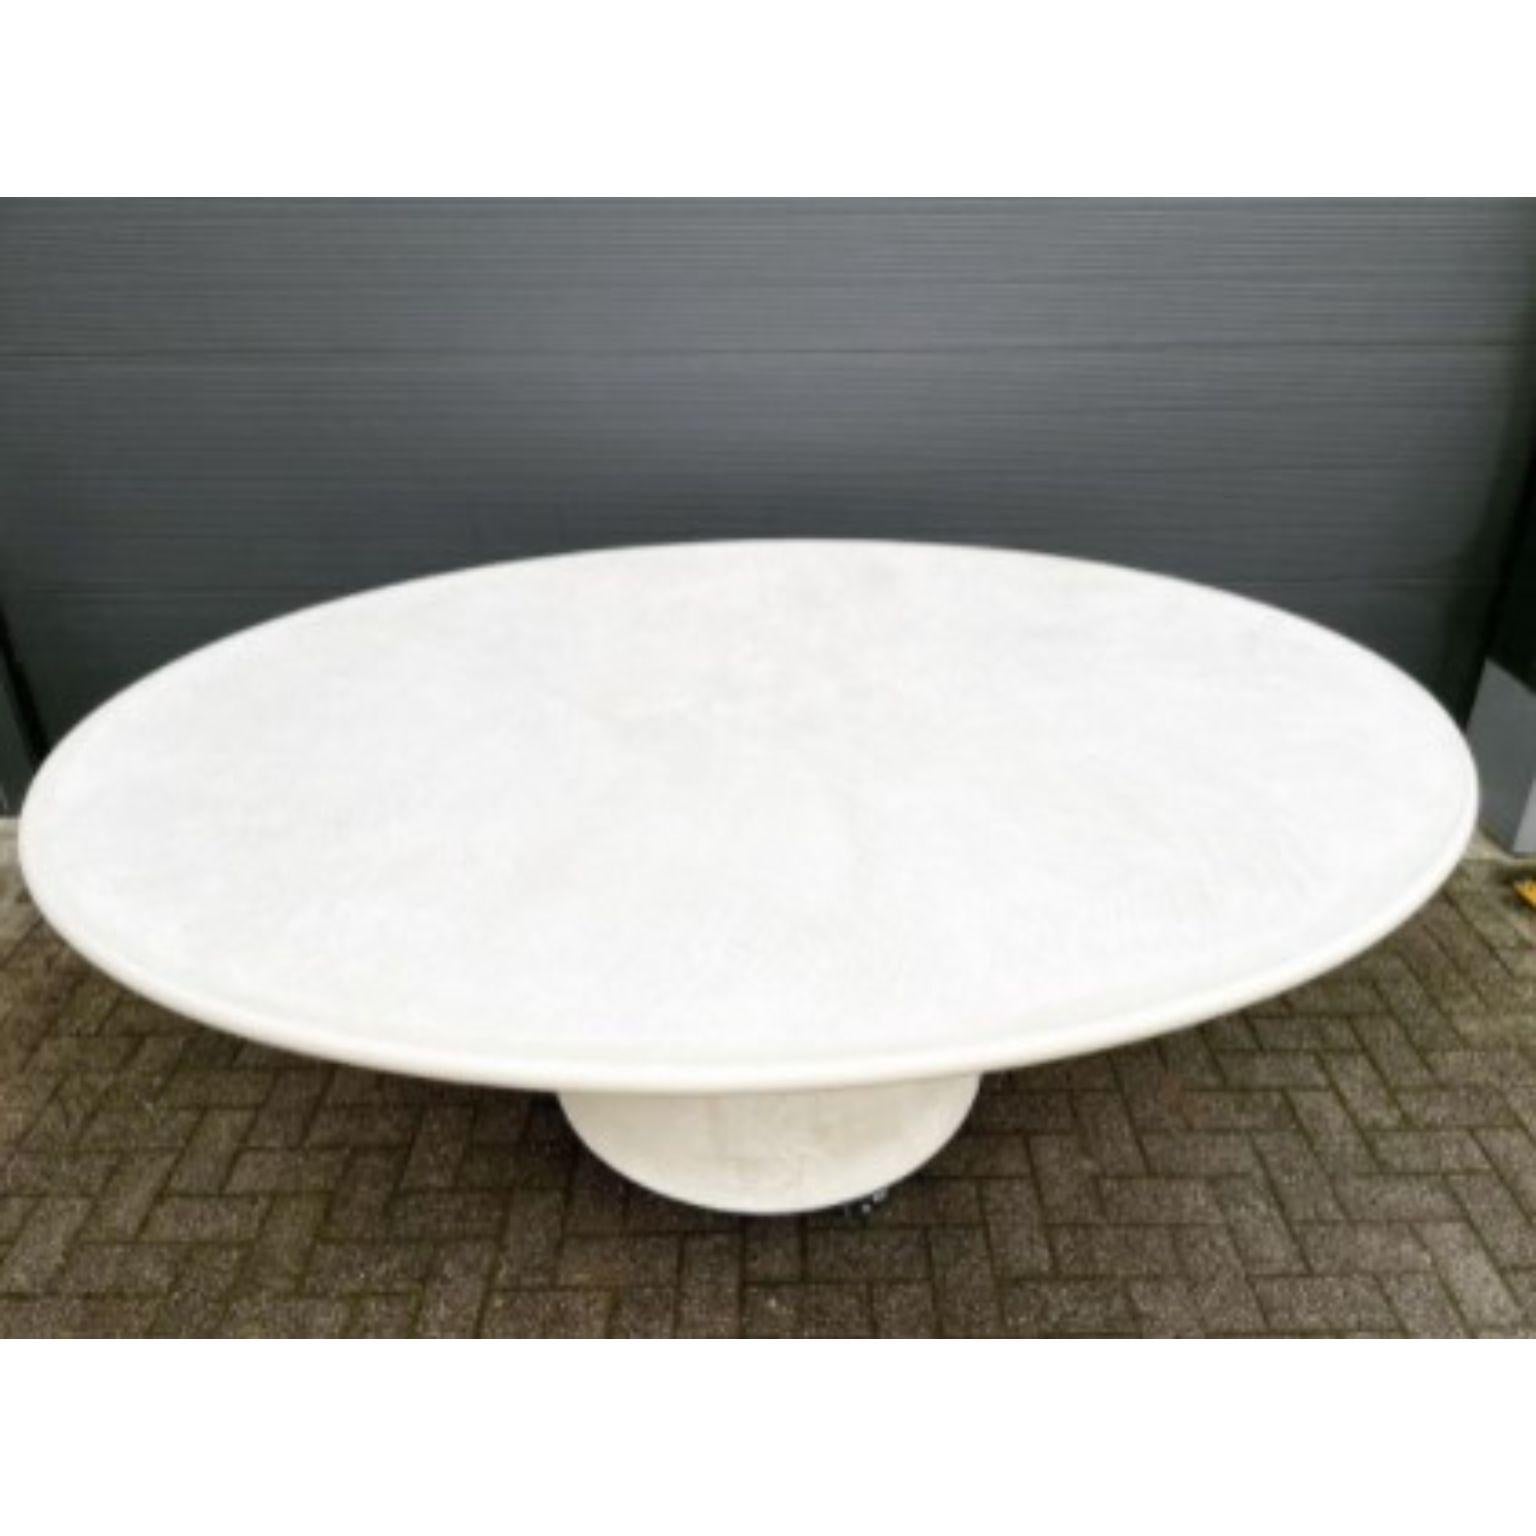 Handmade round outdoor dining table 120 by Philippe Colette
Dimensions: Ø 120 
 foot diameter: 40 cm
Customized height
Materials: Mineral lime plaster.

All shapes / sizes can be customized. Wide range of colors.

Our tables are in mineral